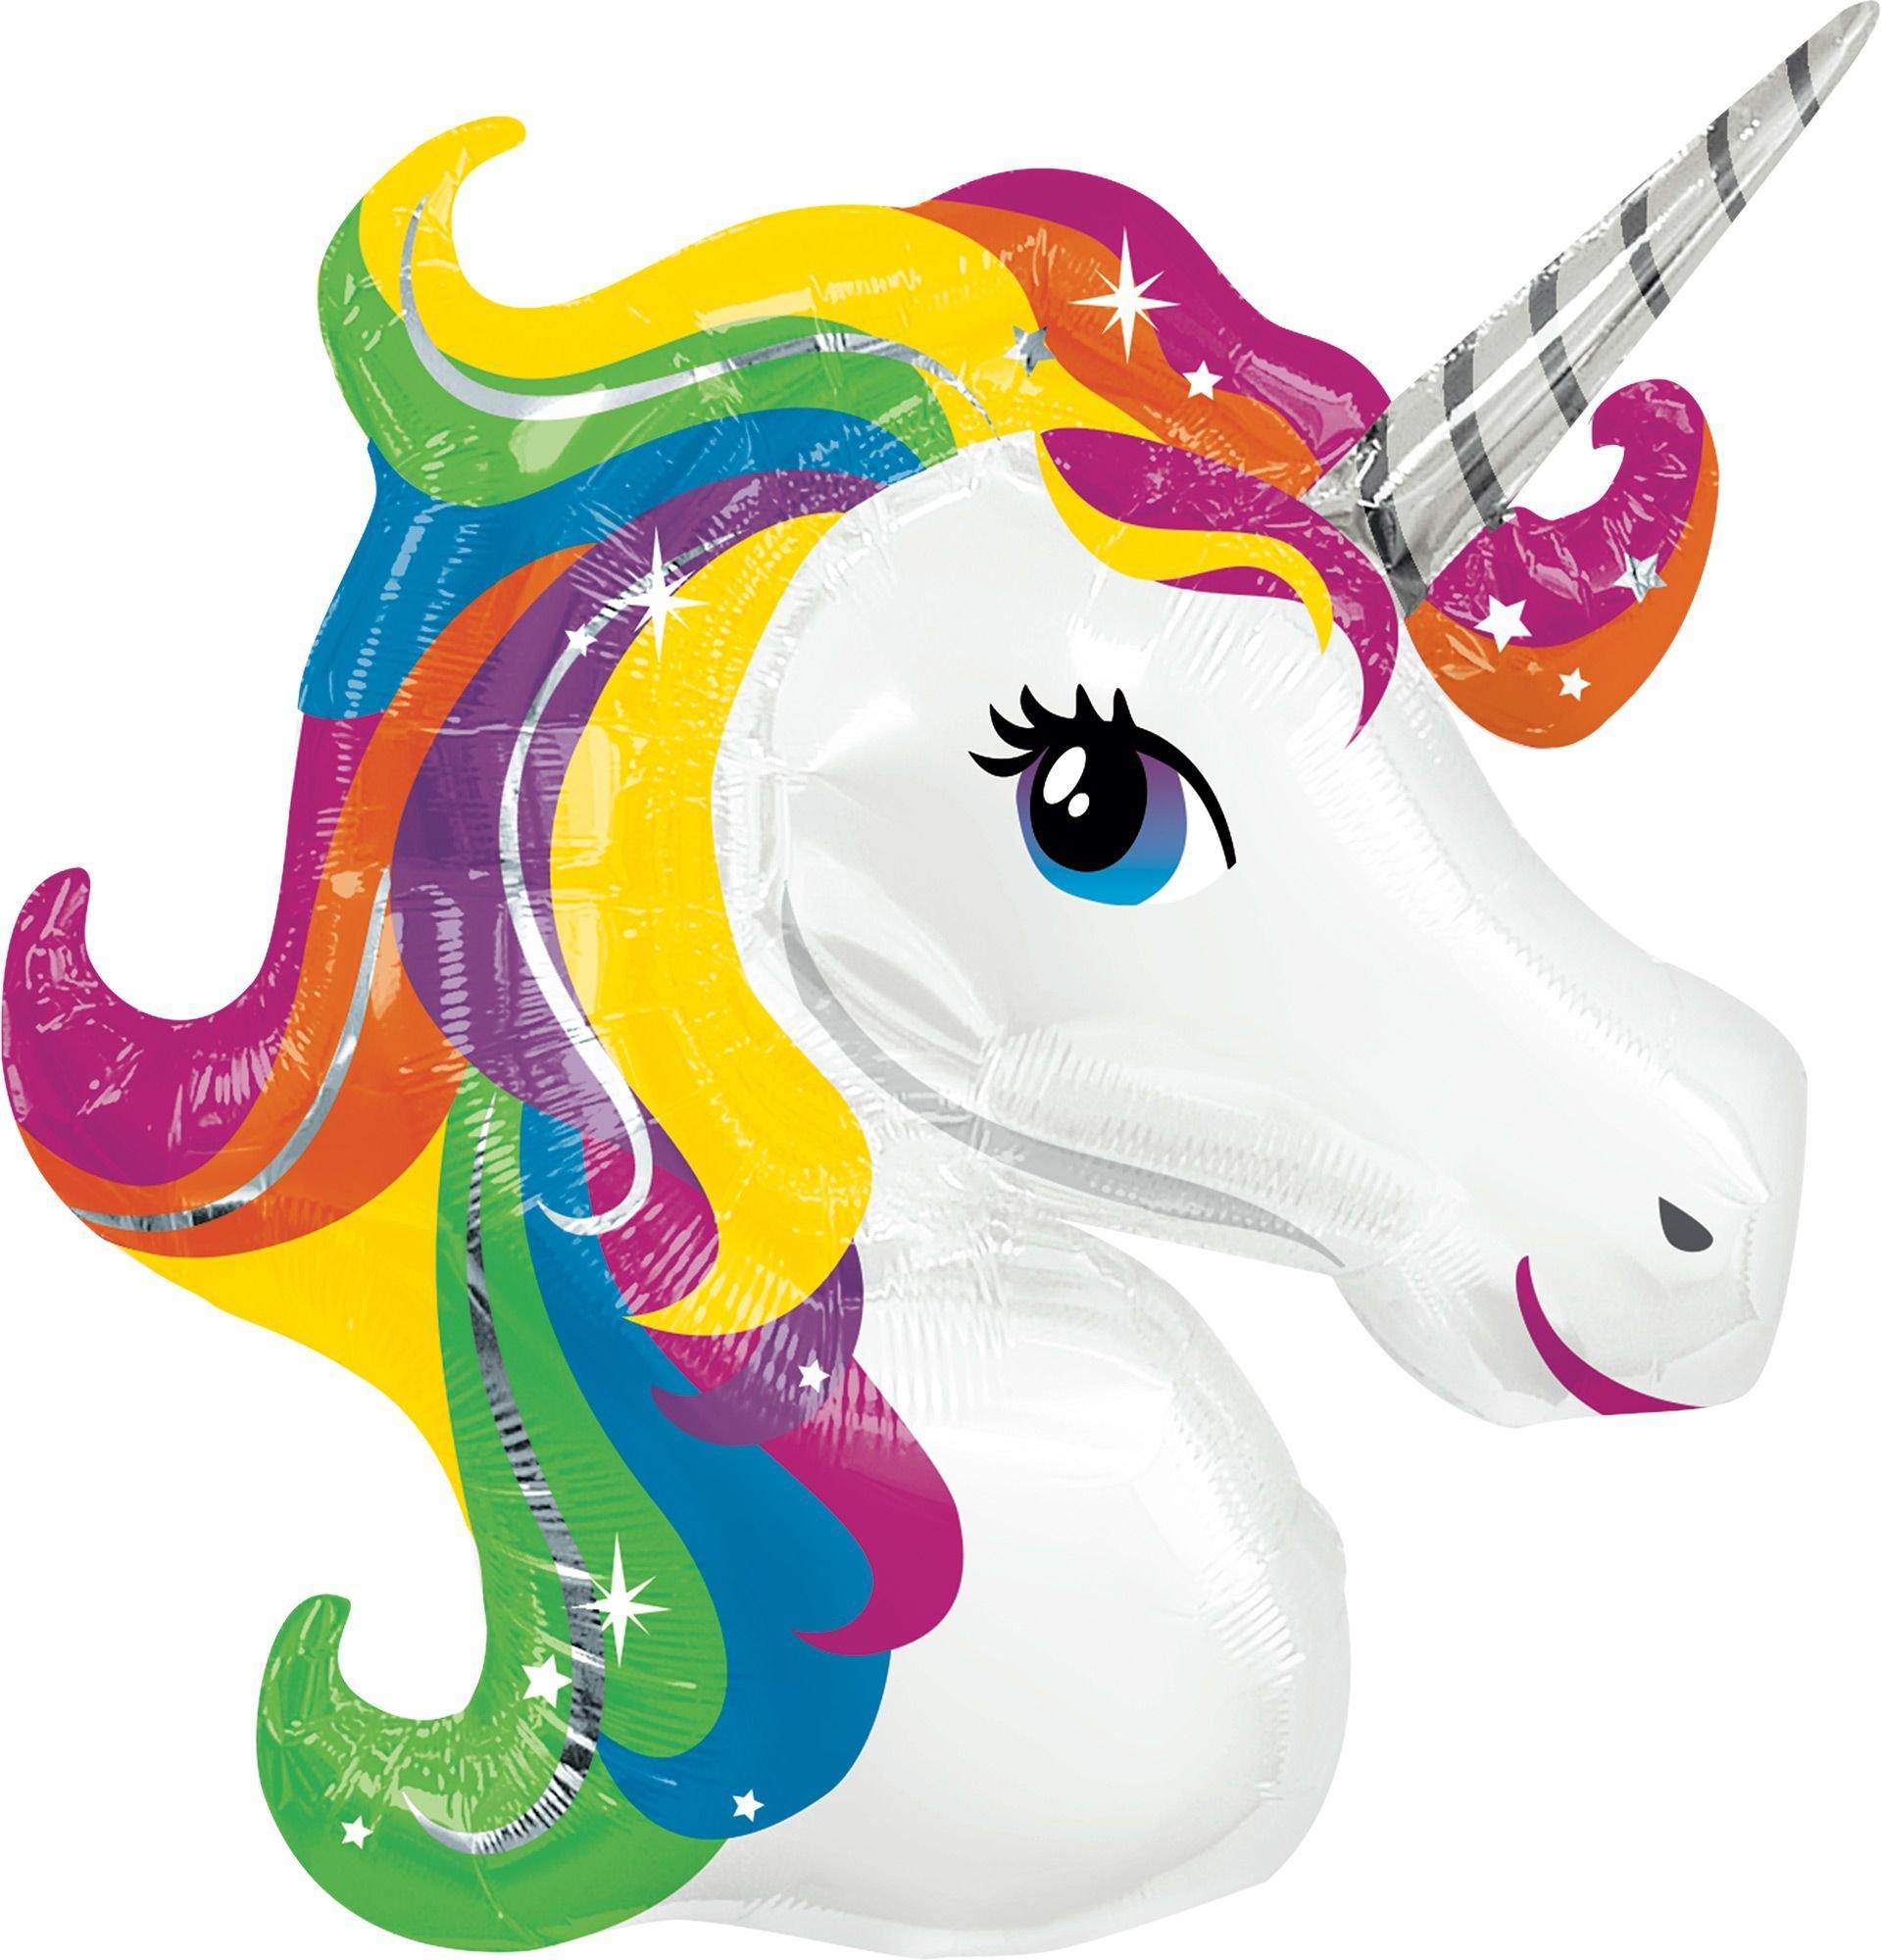 Large number 5 balloon 5th birthday unicorn birthday decorations for girls  party decorations Rainbow Balloons 5 year old birthday decorations - Yahoo  Shopping